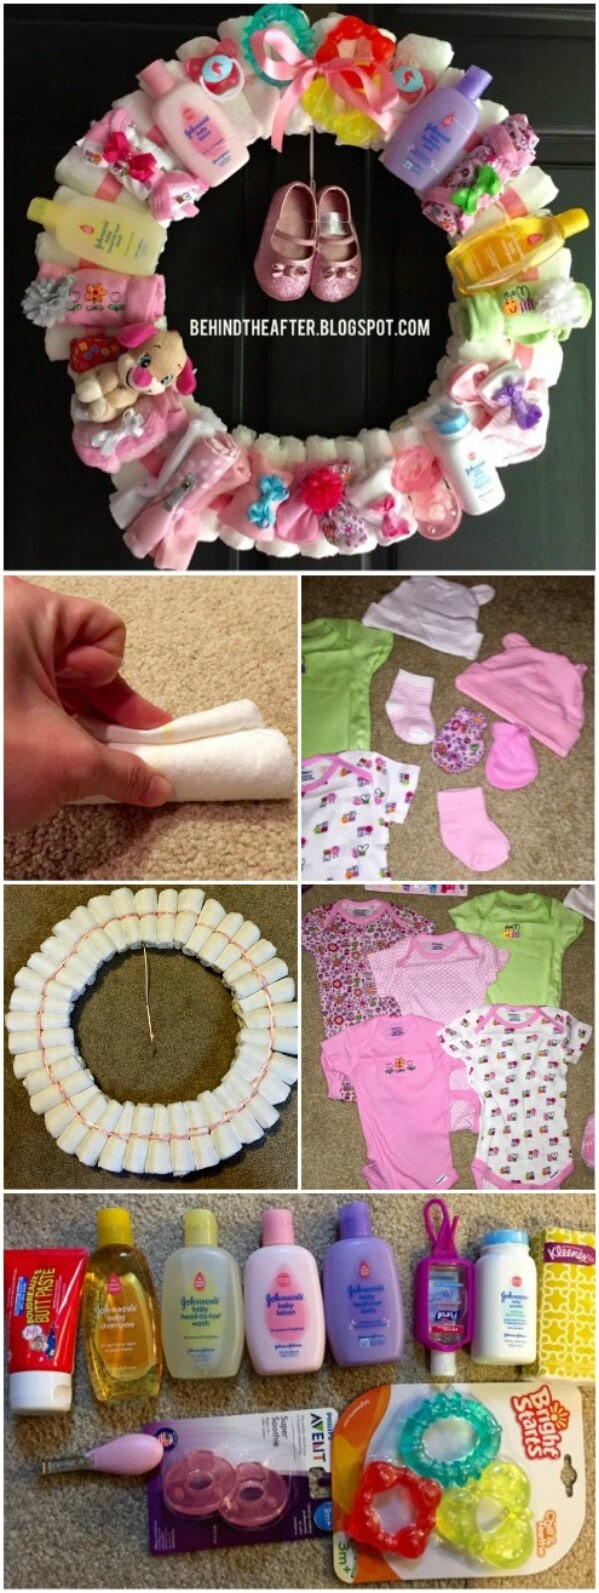 Funny Baby Gift Ideas
 25 Enchantingly Adorable Baby Shower Gift Ideas That Will